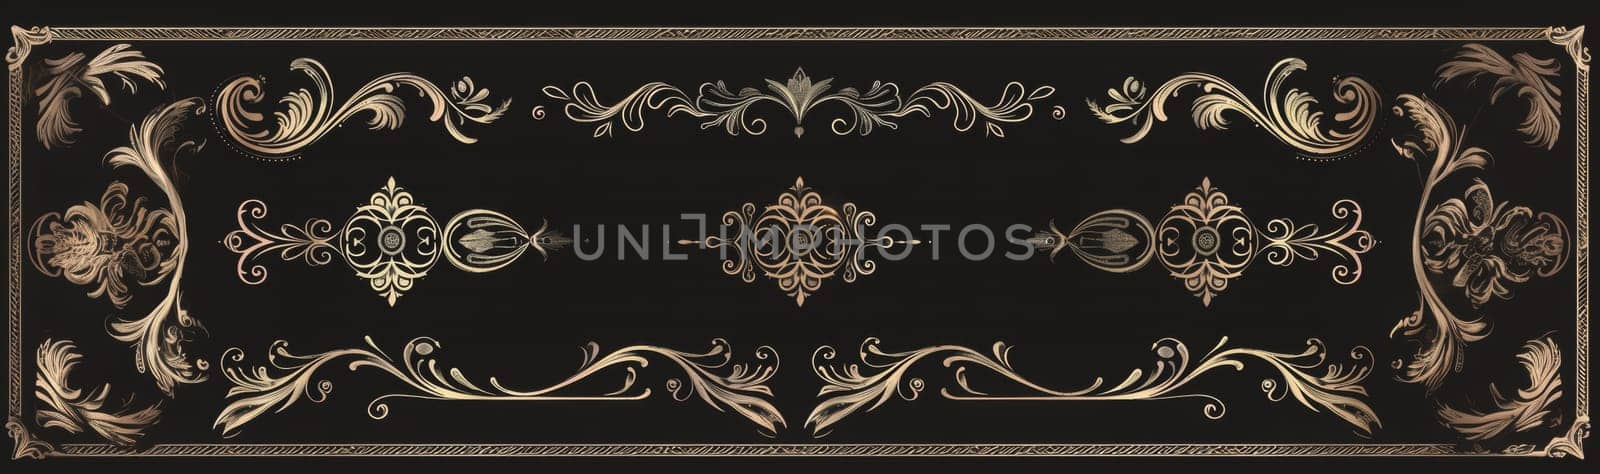 Elegant black and gold baroque frame with detailed floral patterns and designs on a dark background. by sfinks